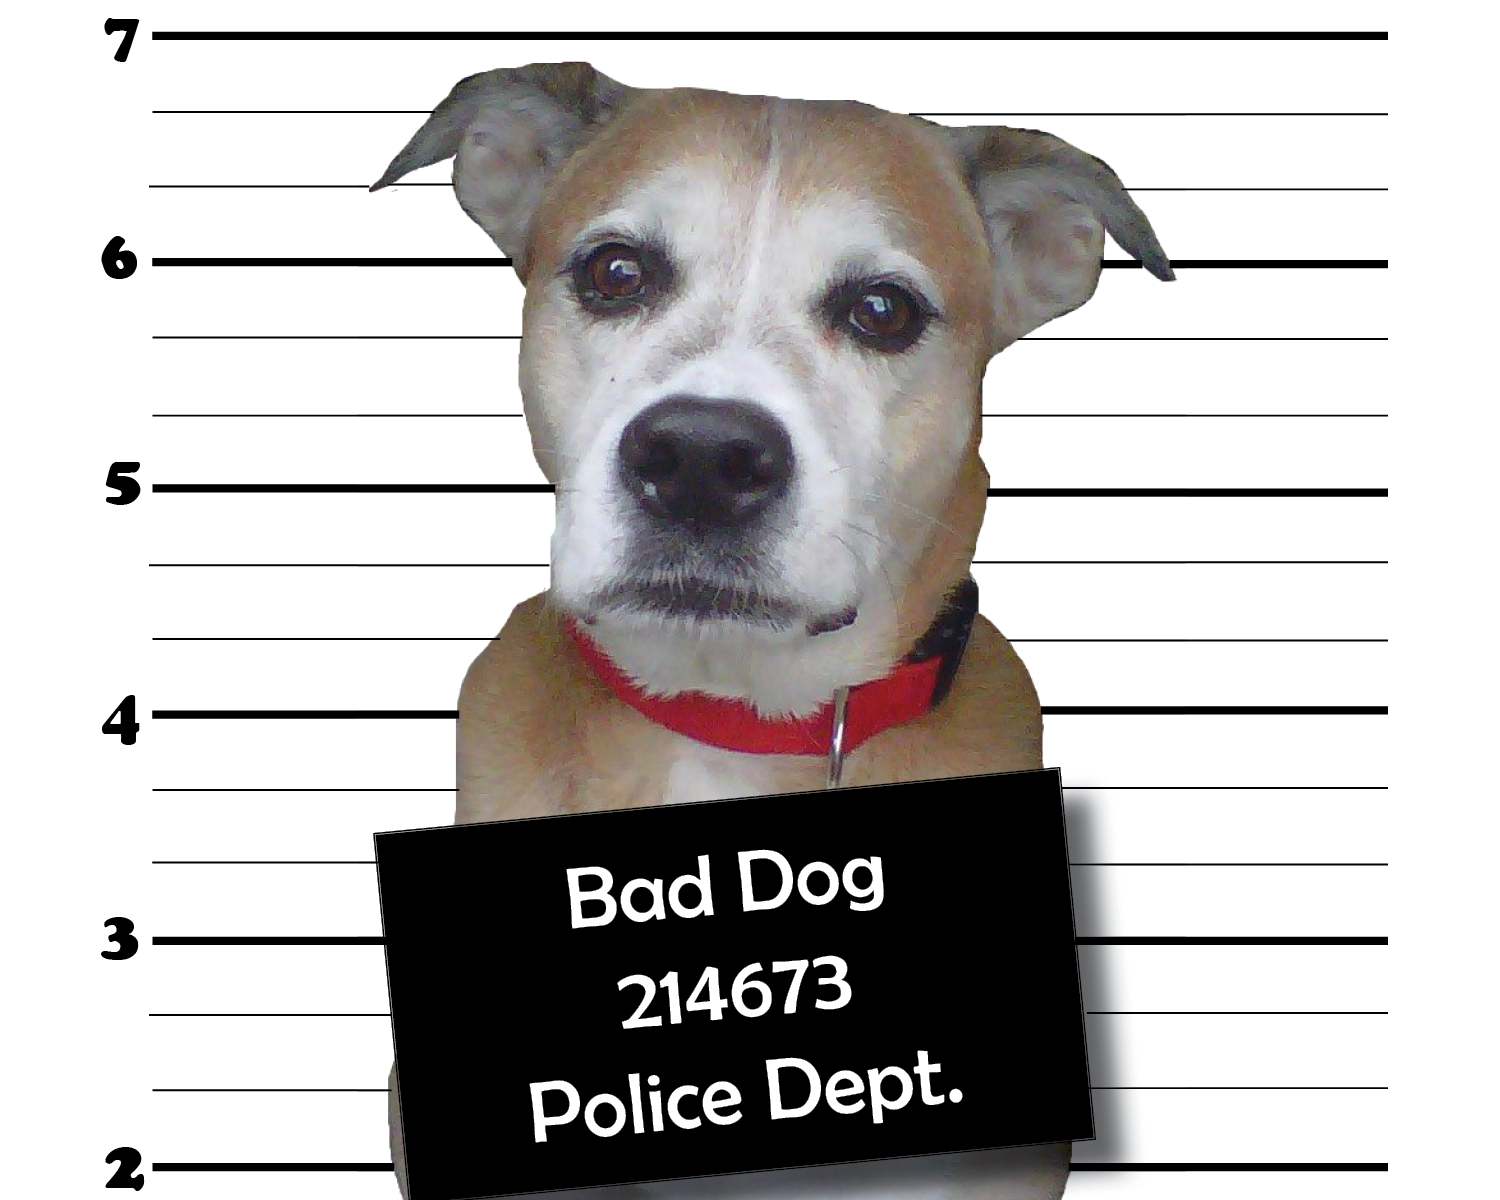 With All The Concerns In Modern Life, We Expend Immense Amounts Of Energy On So Many Daily Activities, Work, Relationships And Hobbies. - Bad Dog, Transparent background PNG HD thumbnail